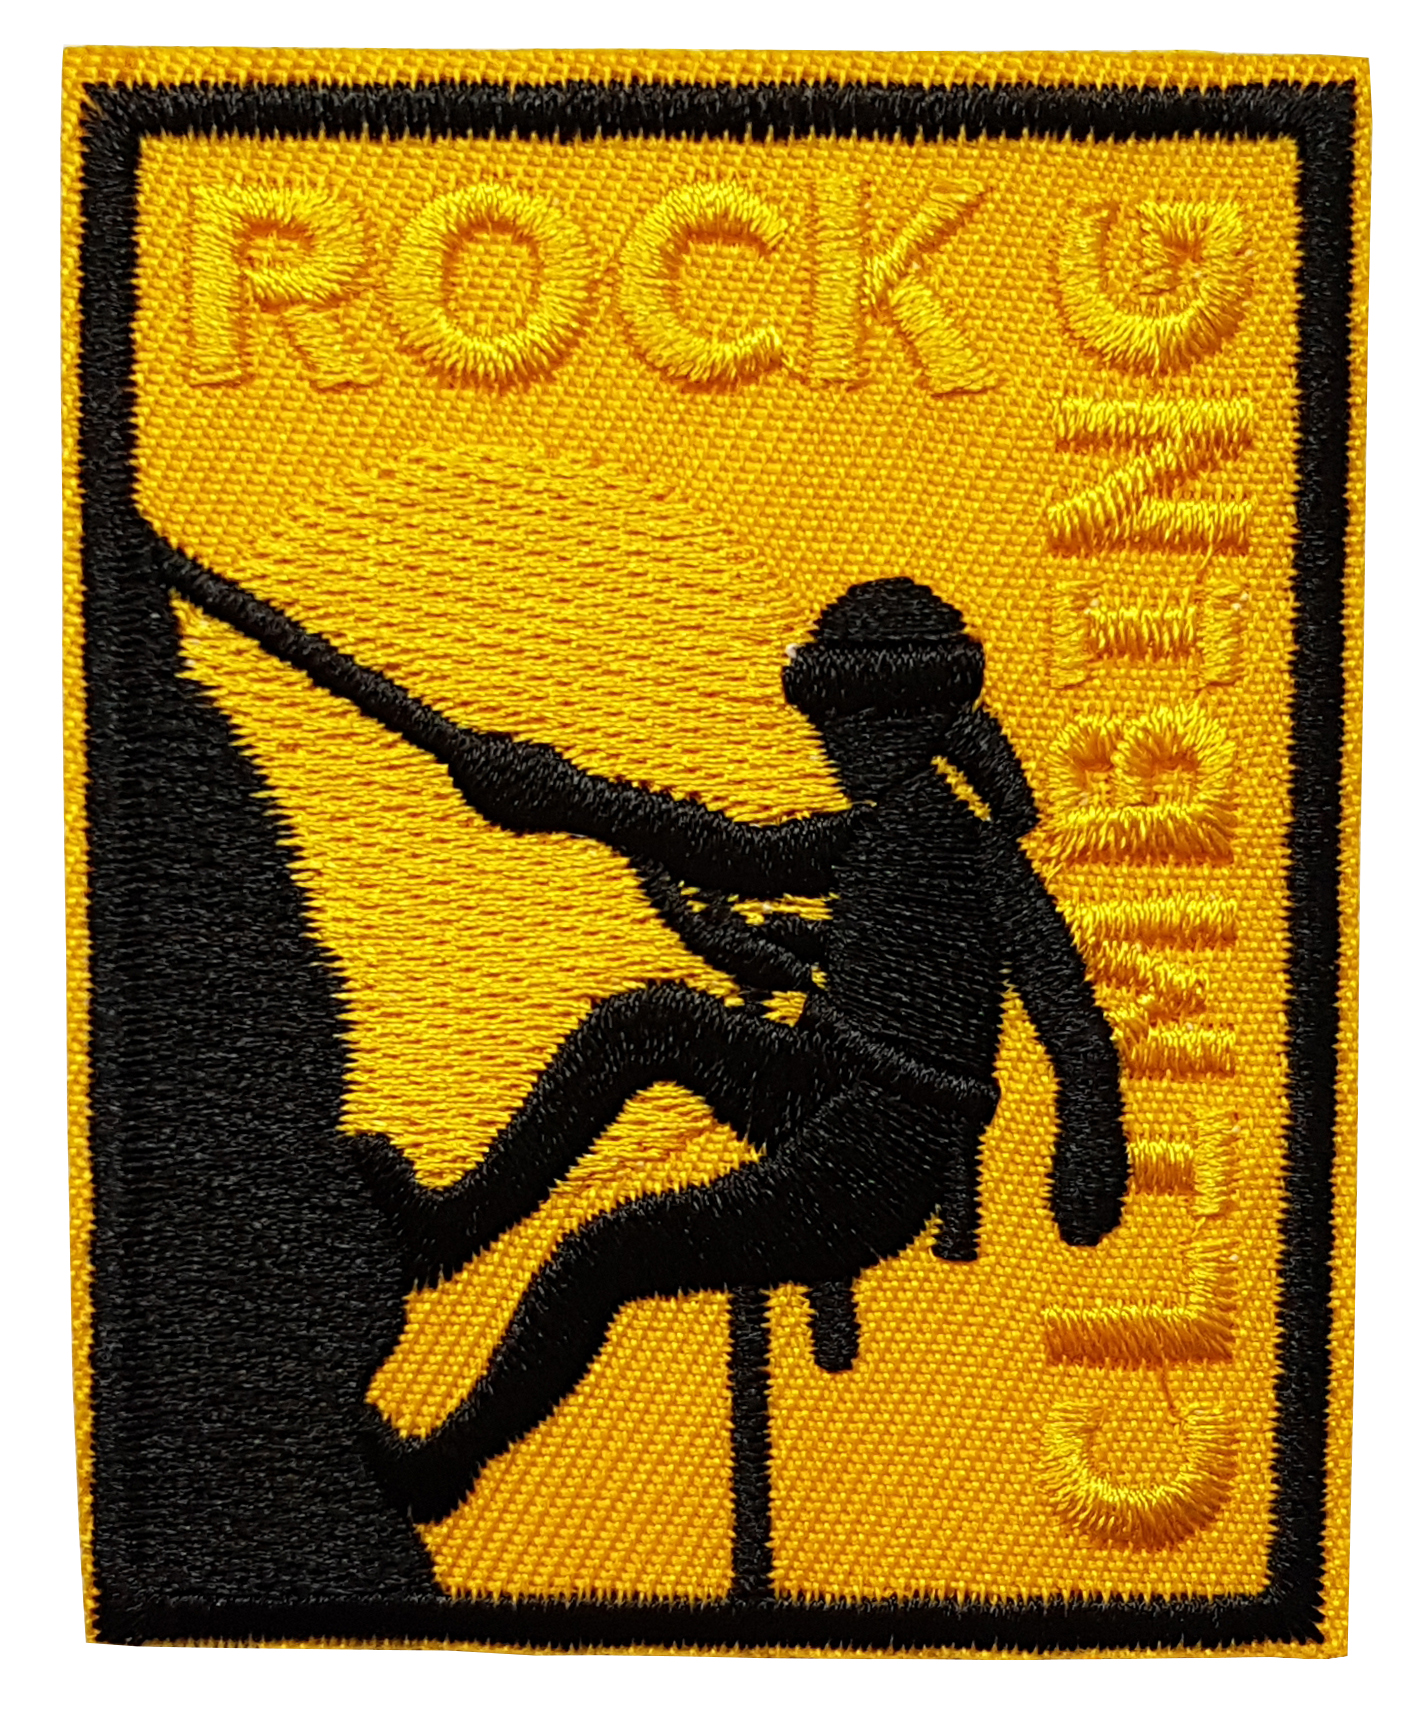 Patch Thermocollant Escalade